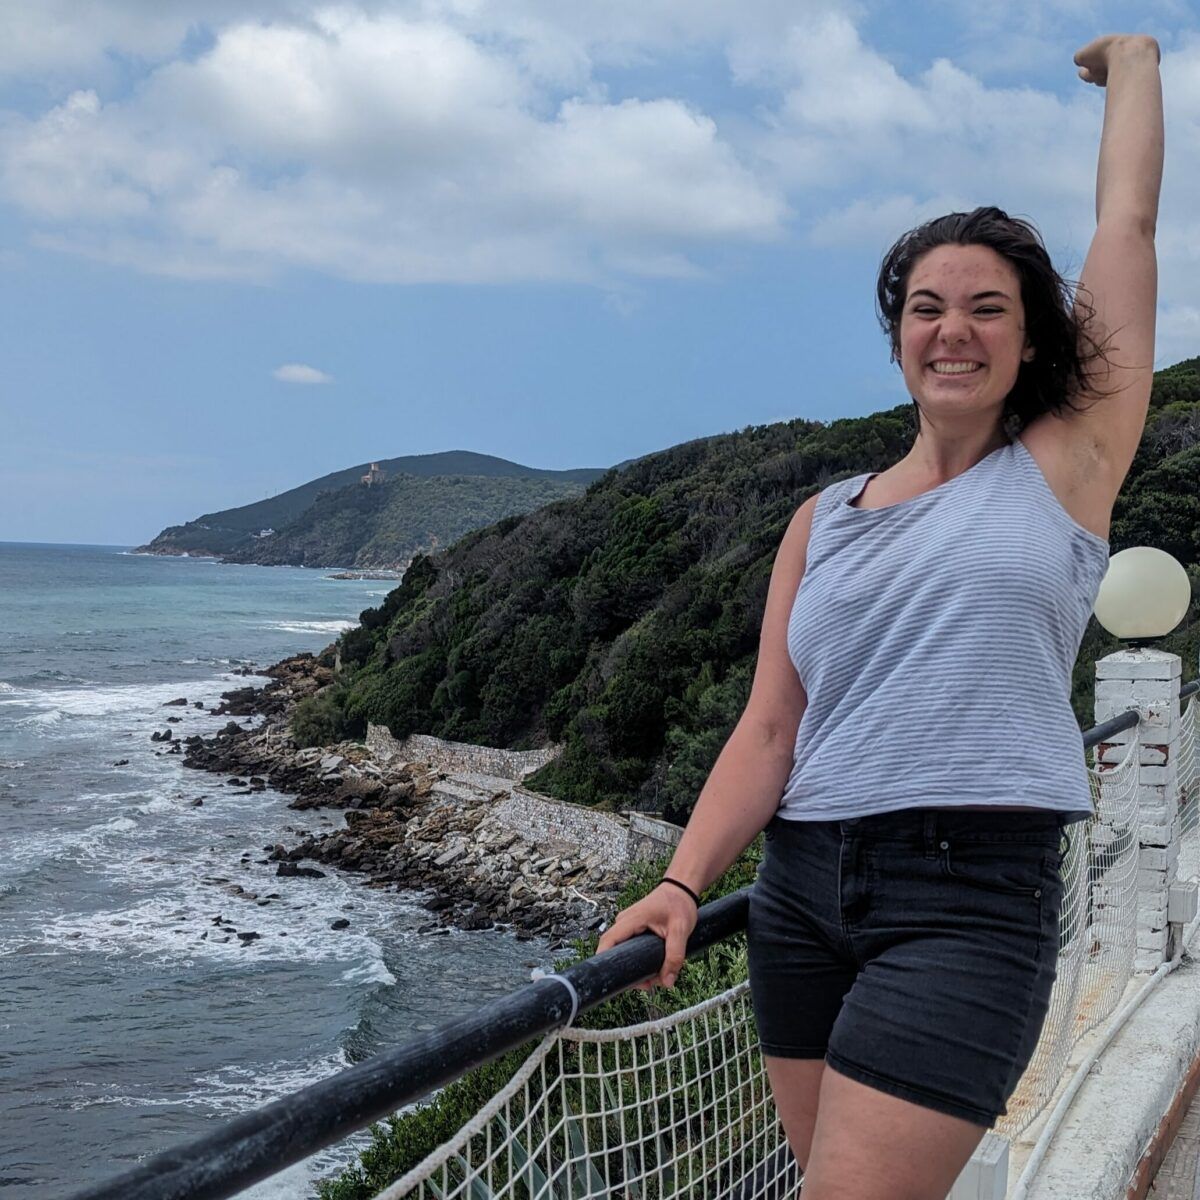 Jodelle posing at coastal lookout point, with one arm up in the air and the other hand holding the railing.